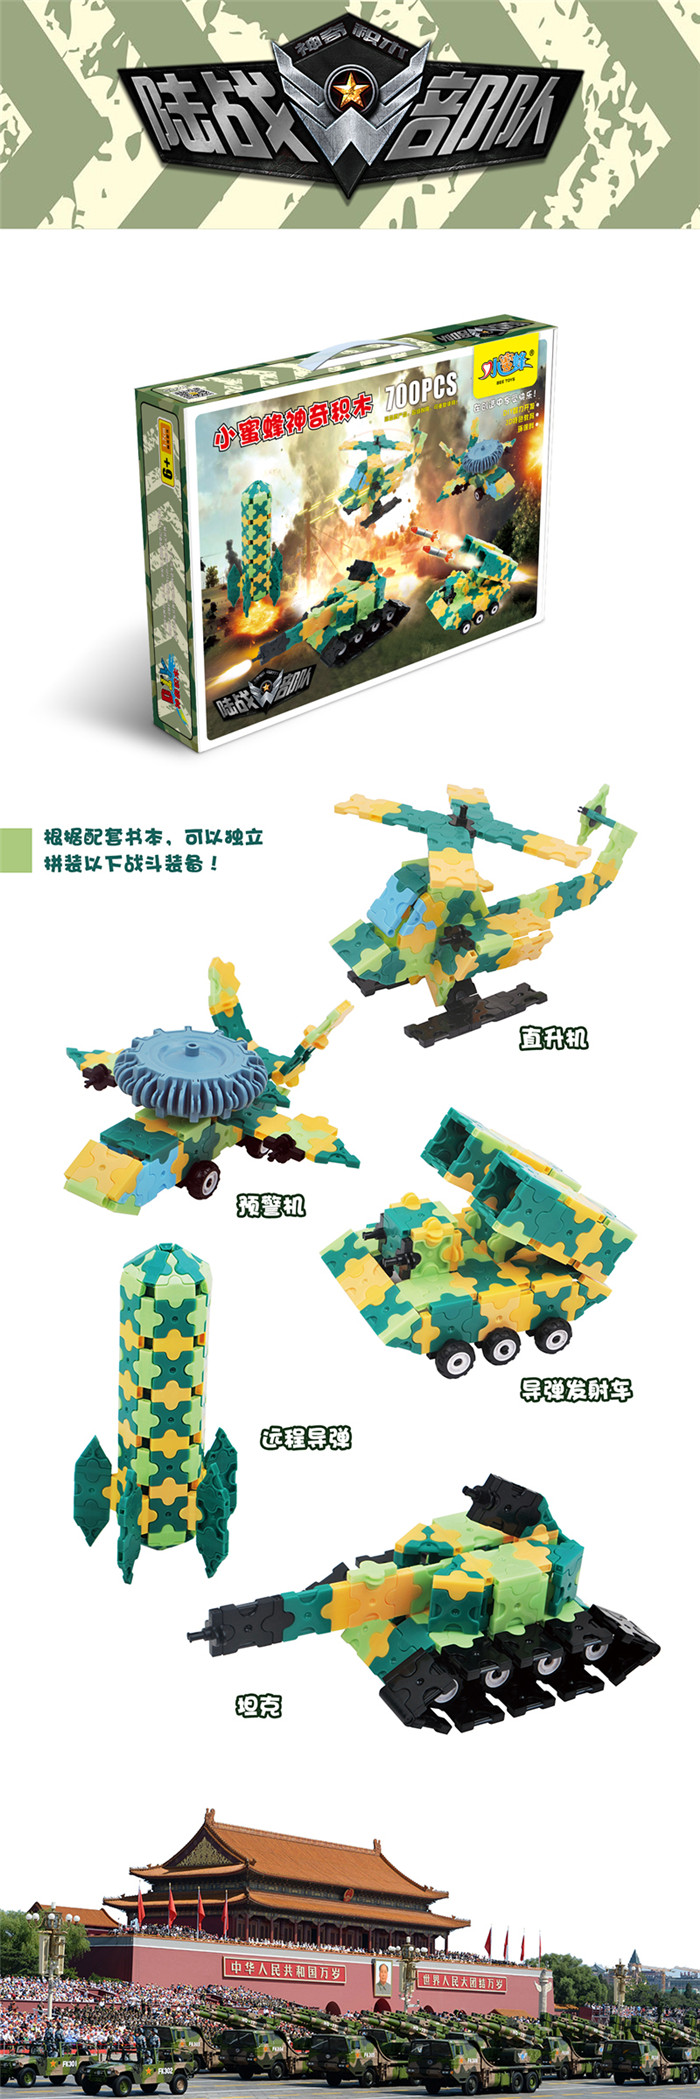 Bee magic 3D LEGO Marines toys toys and gifts early childhood education7